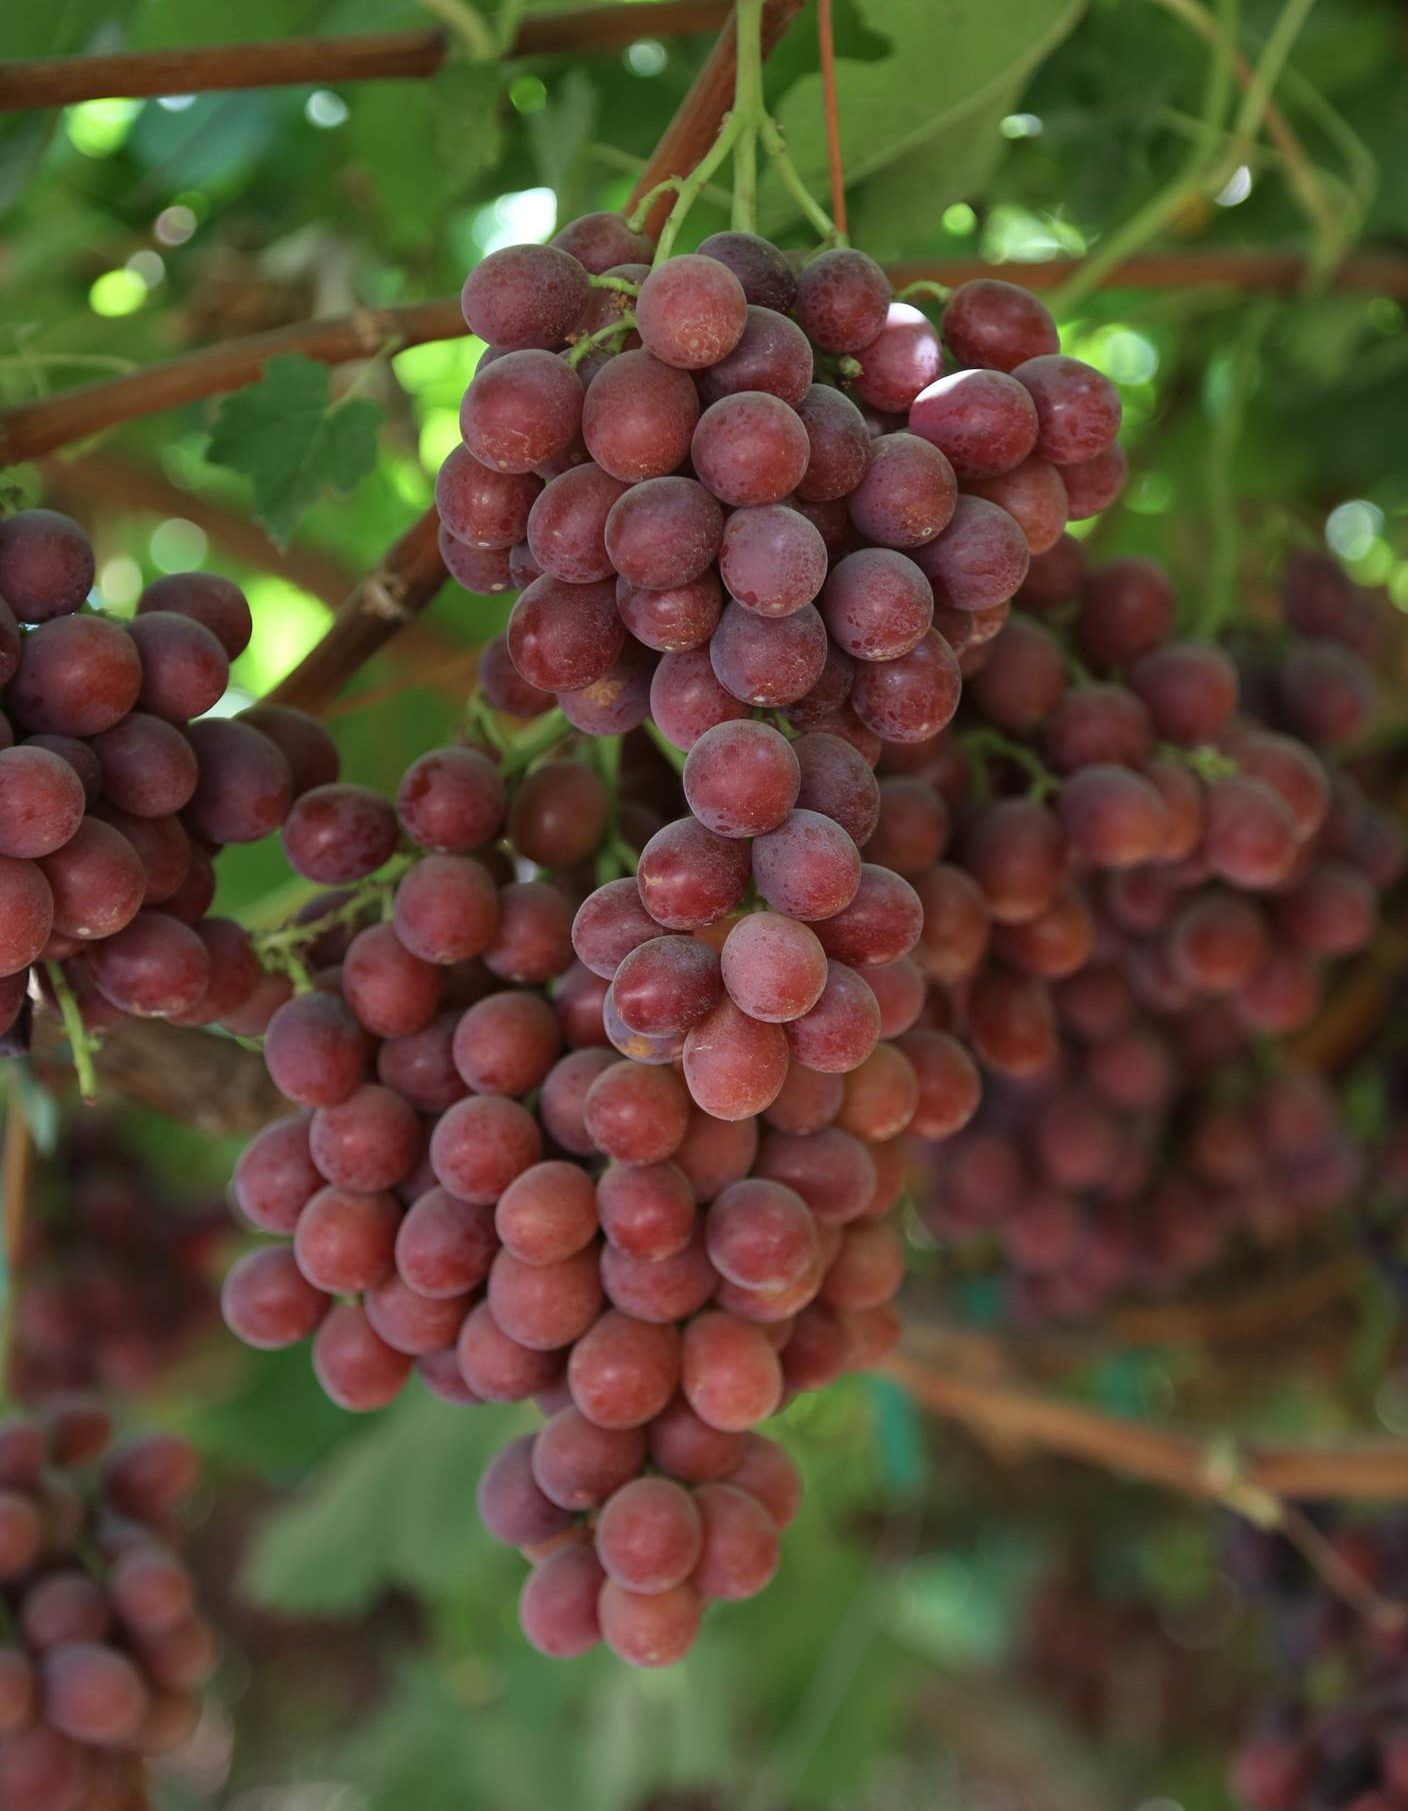 table grape and wine grape production conserve water. The Magic of Water, Kern County